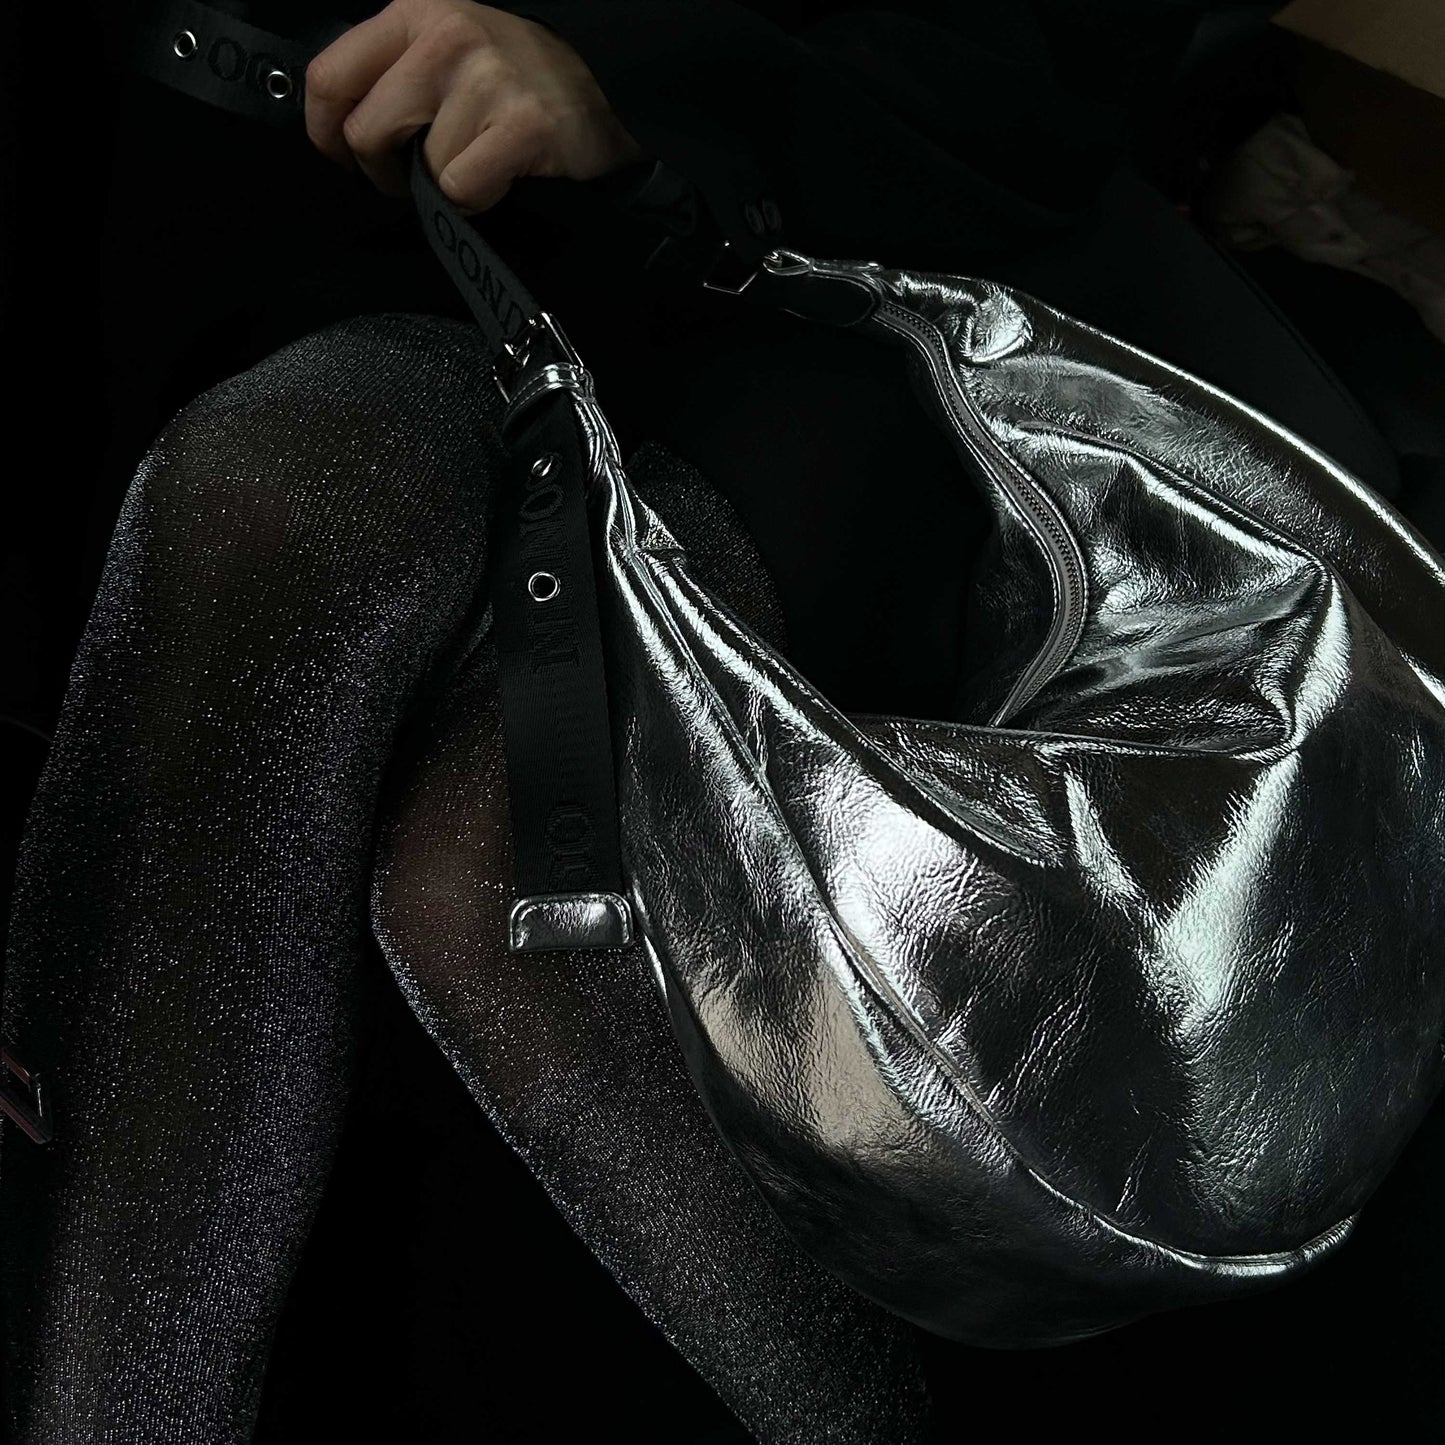 Núnoo Stella recycled cool silver Shoulder bags Silver